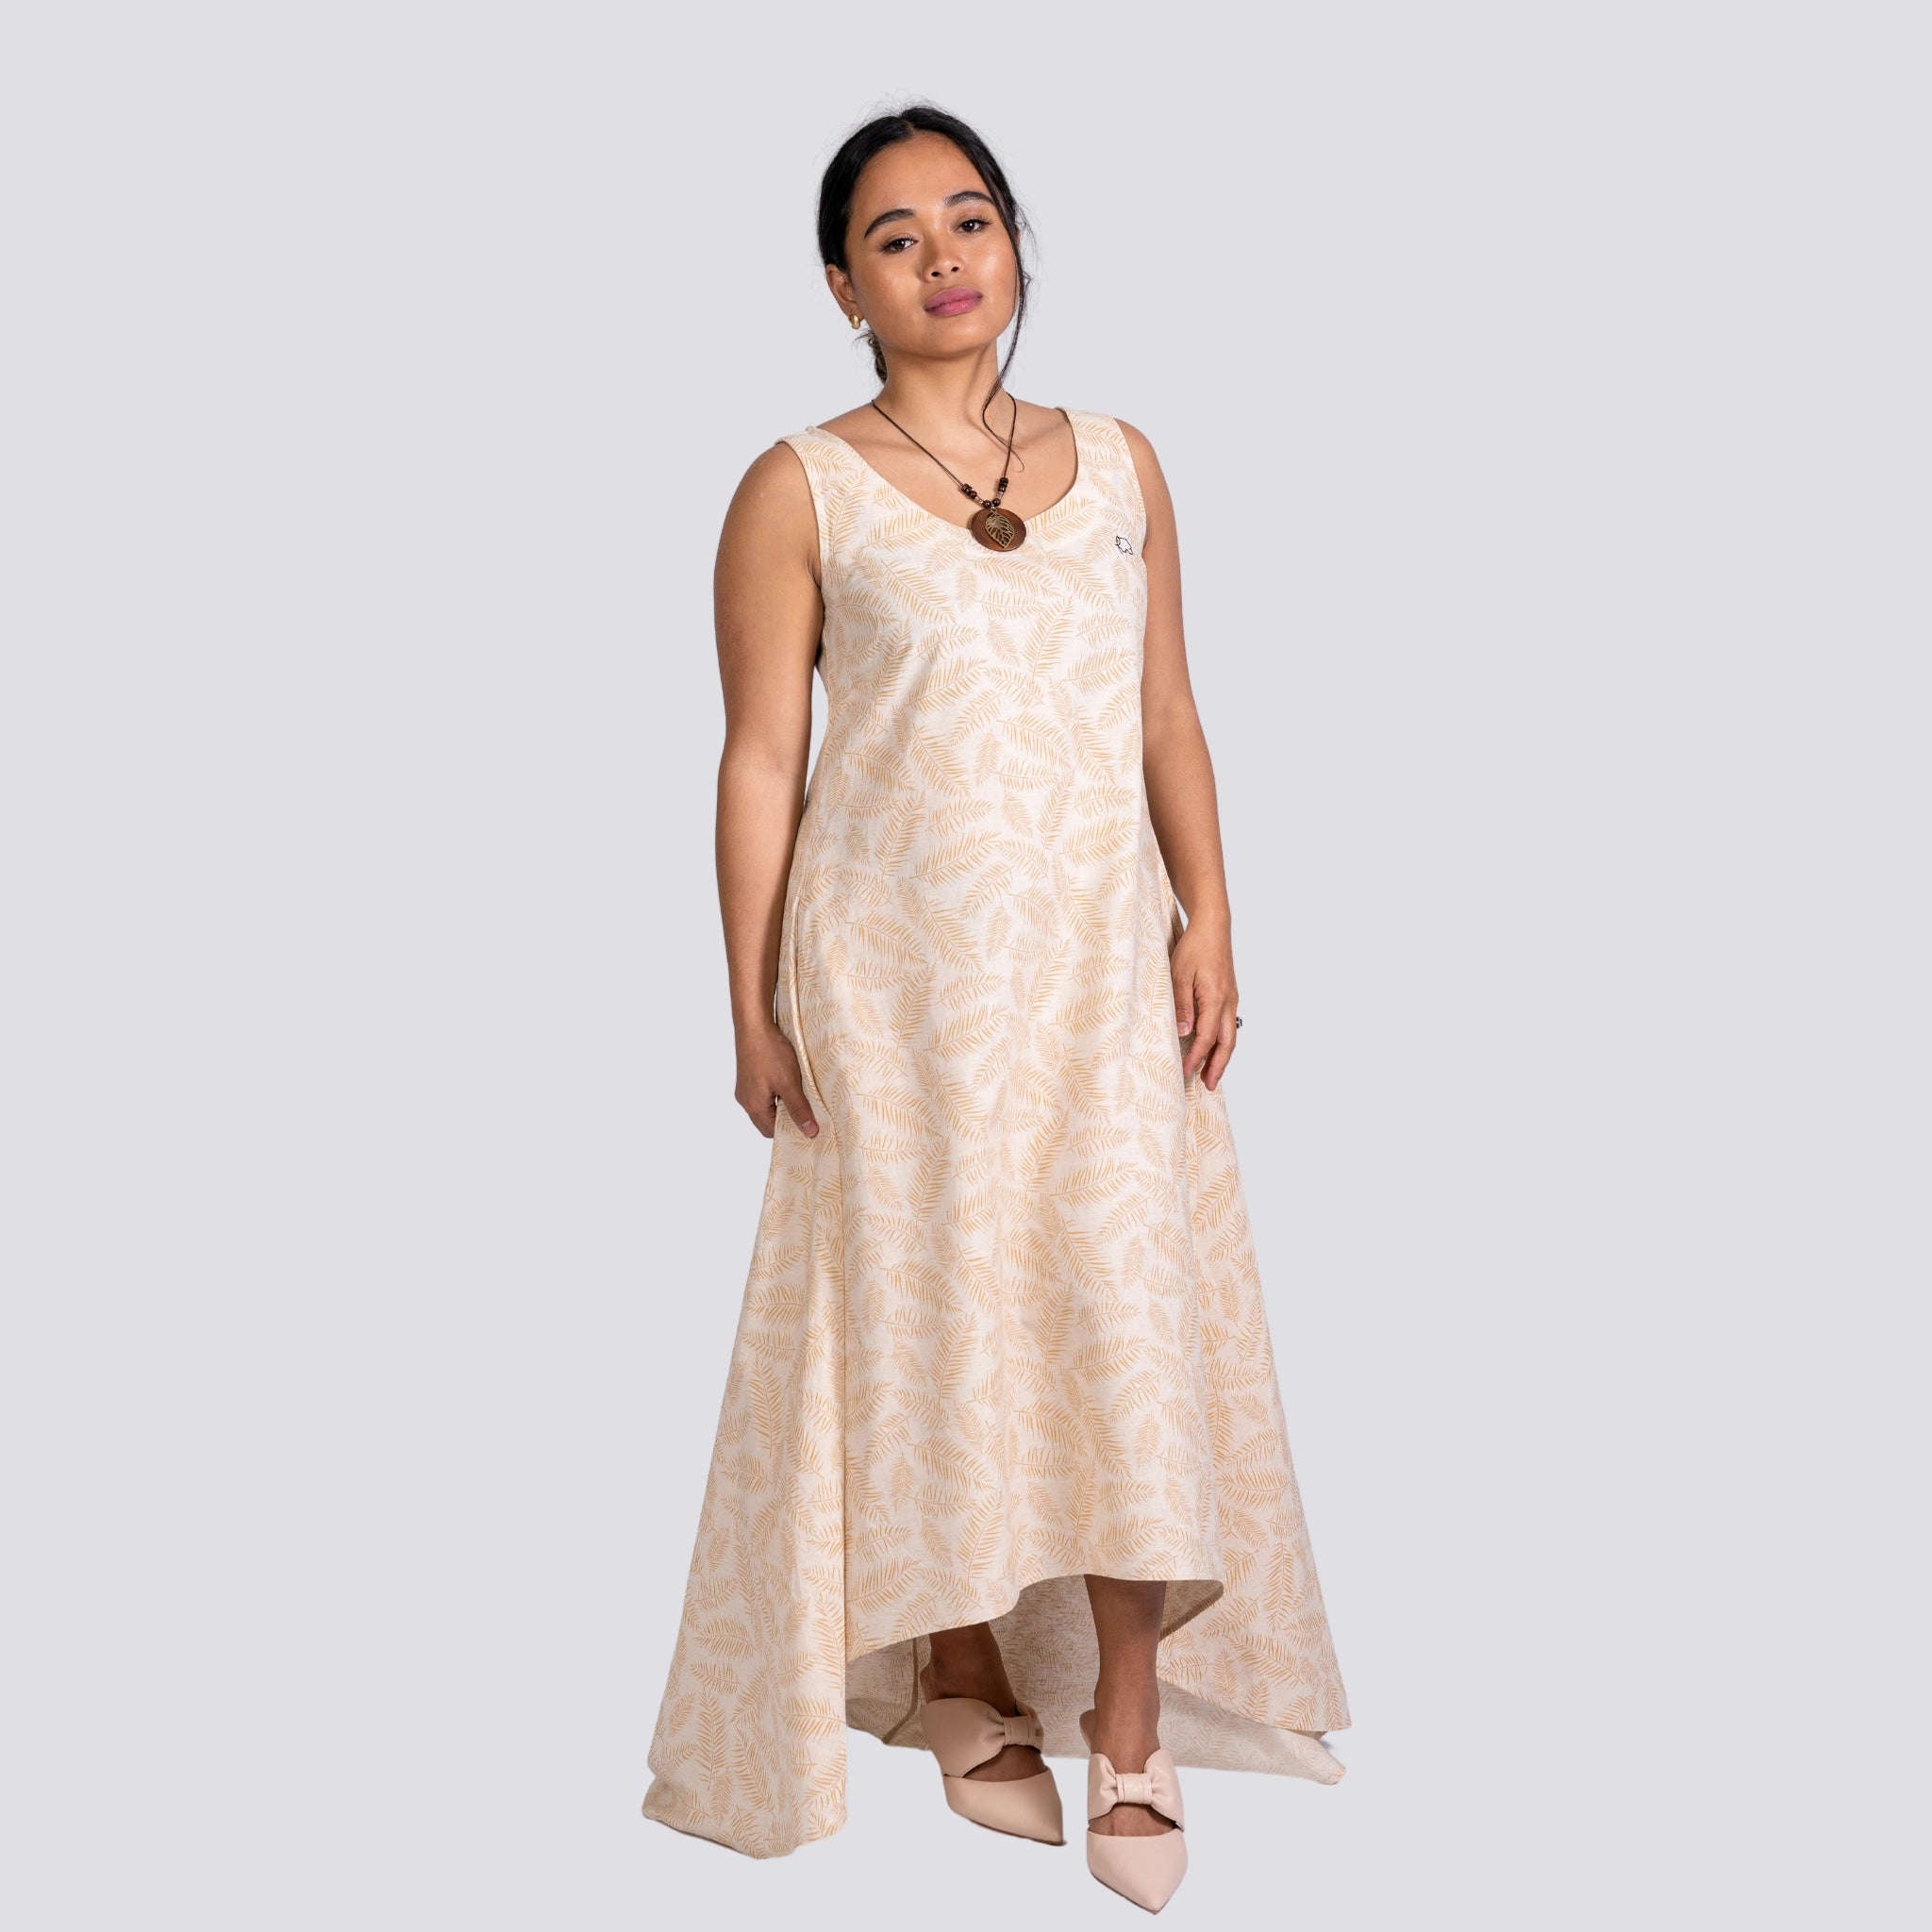 A woman in a sleeveless U-neck design beige Karee High Low Linen Cotton Midi Dress and beige shoes, standing against a gray background, looking at the camera.